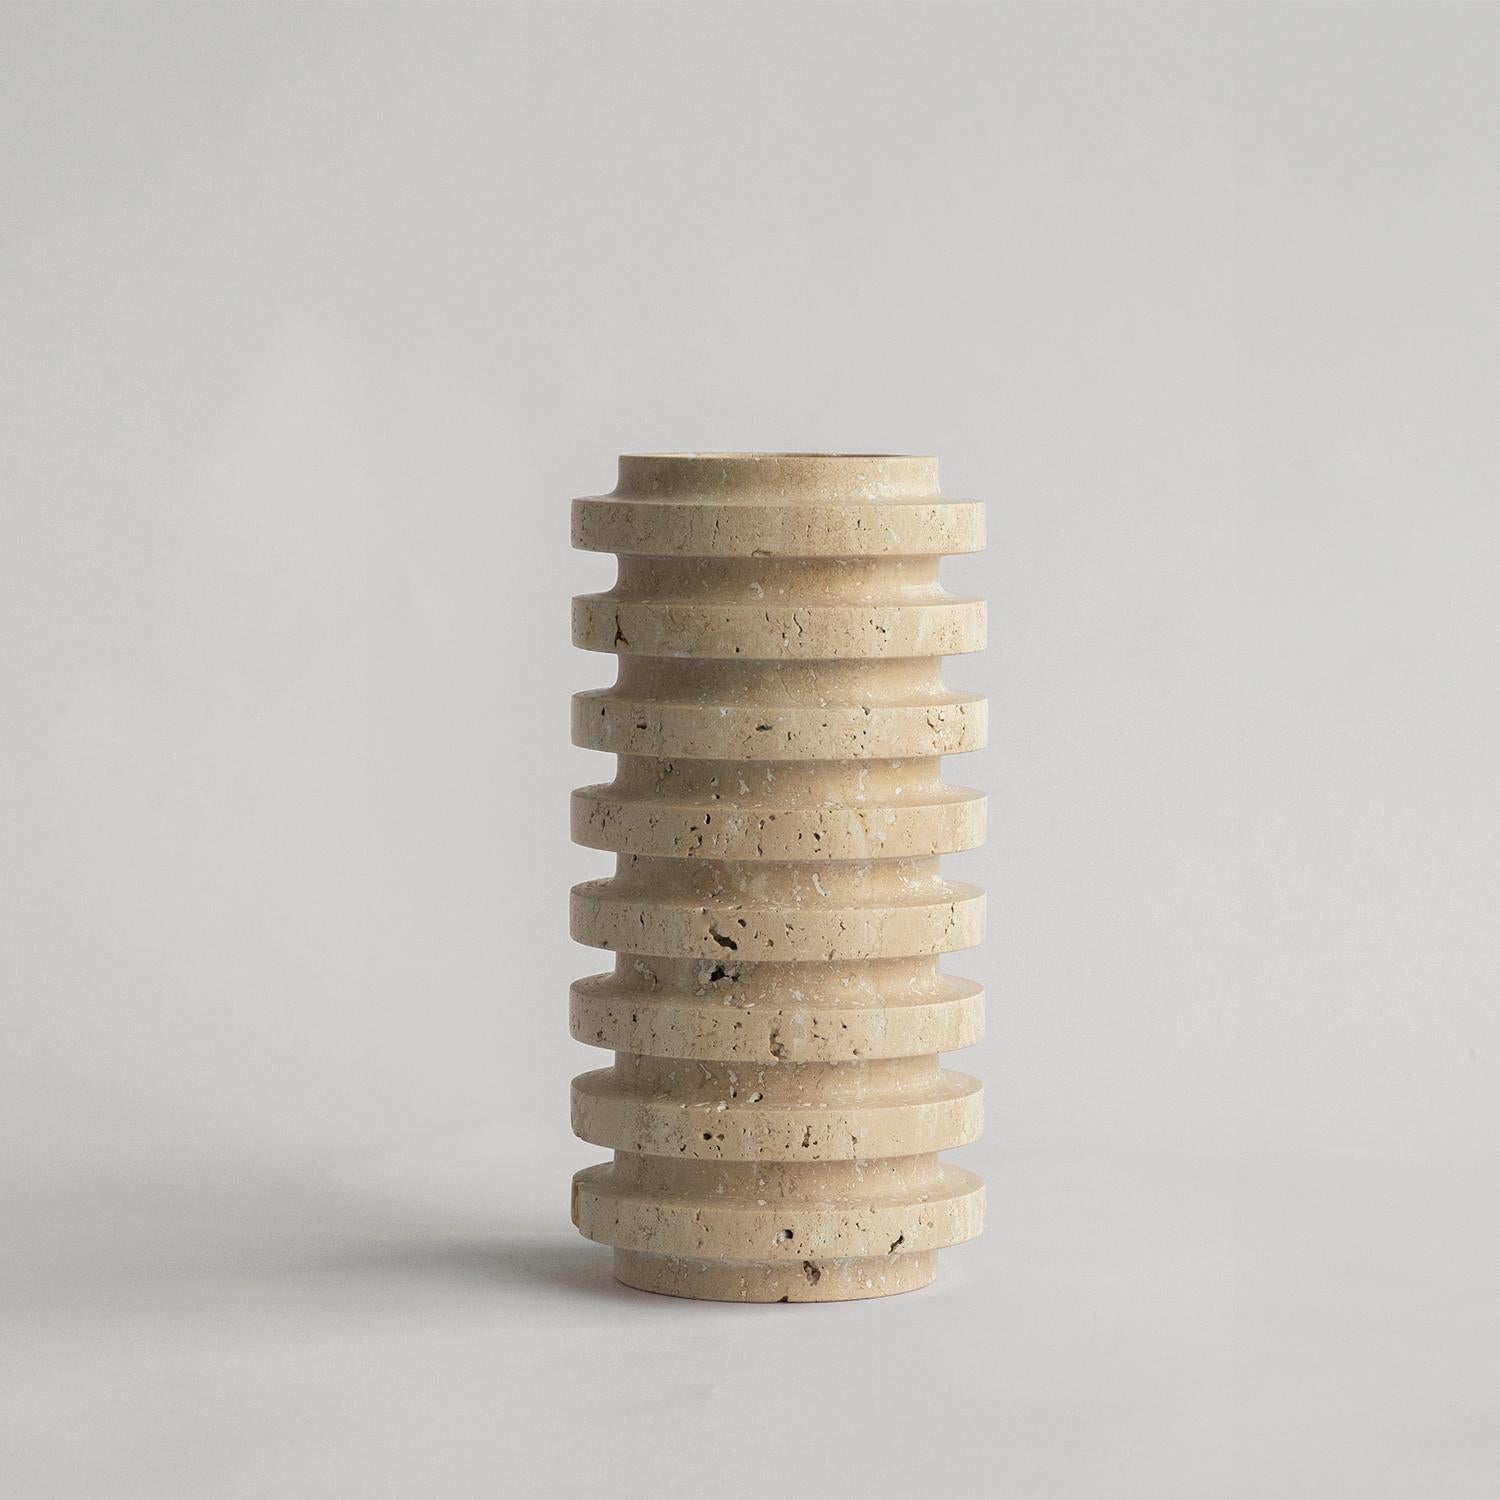 Stunning, aesthetic, timeless are words that can be used to describe this elegant and modern travertine vase from Kiwano. Expertly crafted and finished by hand, our travertine vases are a study in sculptural simplicity. Natural variations in the